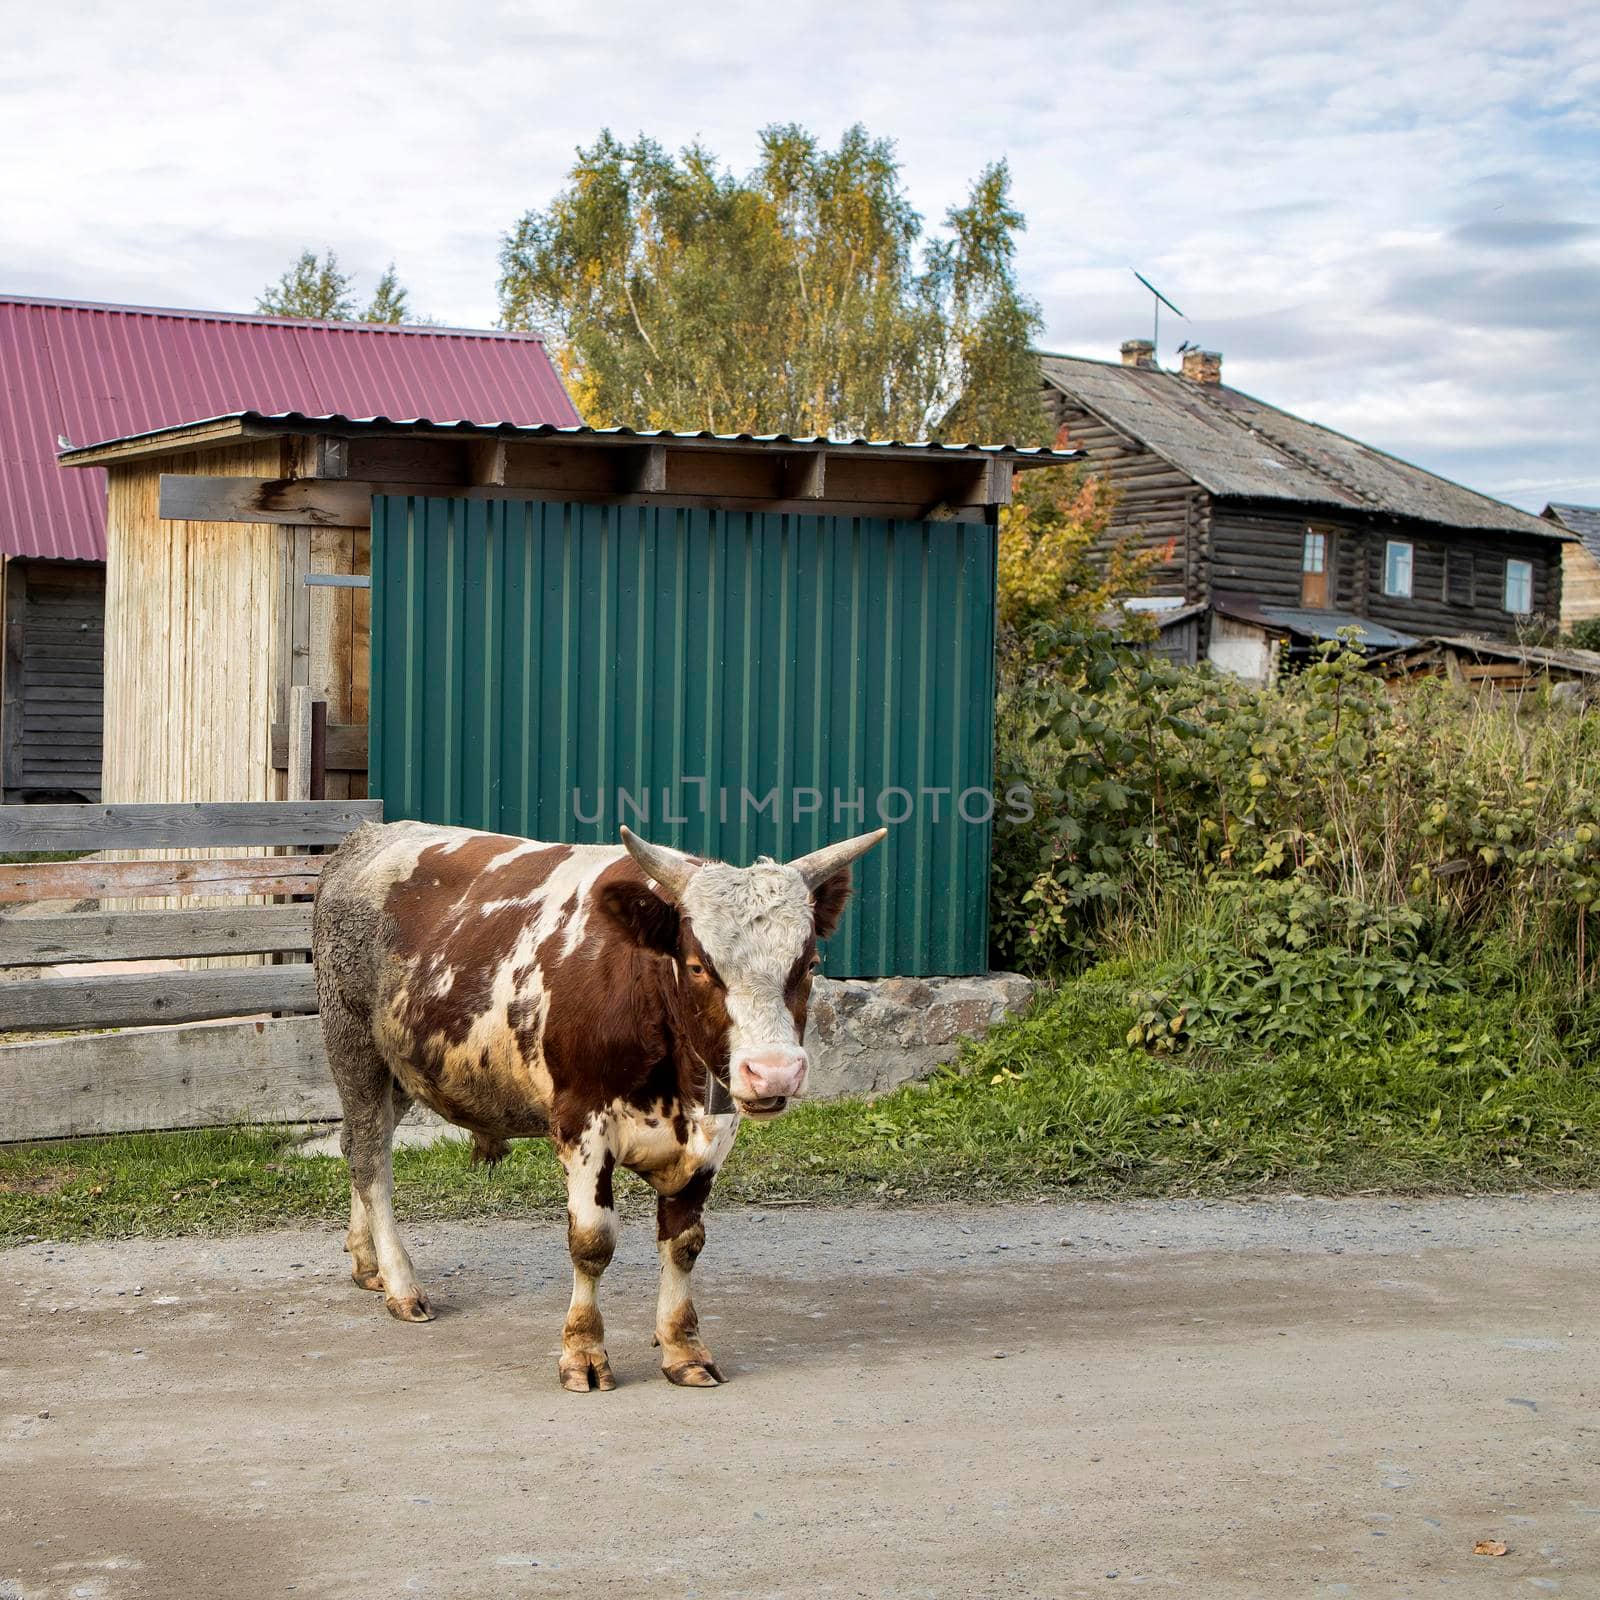 A bull grazes on the street of a Karelian village. Ayrshire cattle are a breed of dairy cattle from Ayrshire in southwest Scotland. by elenarostunova